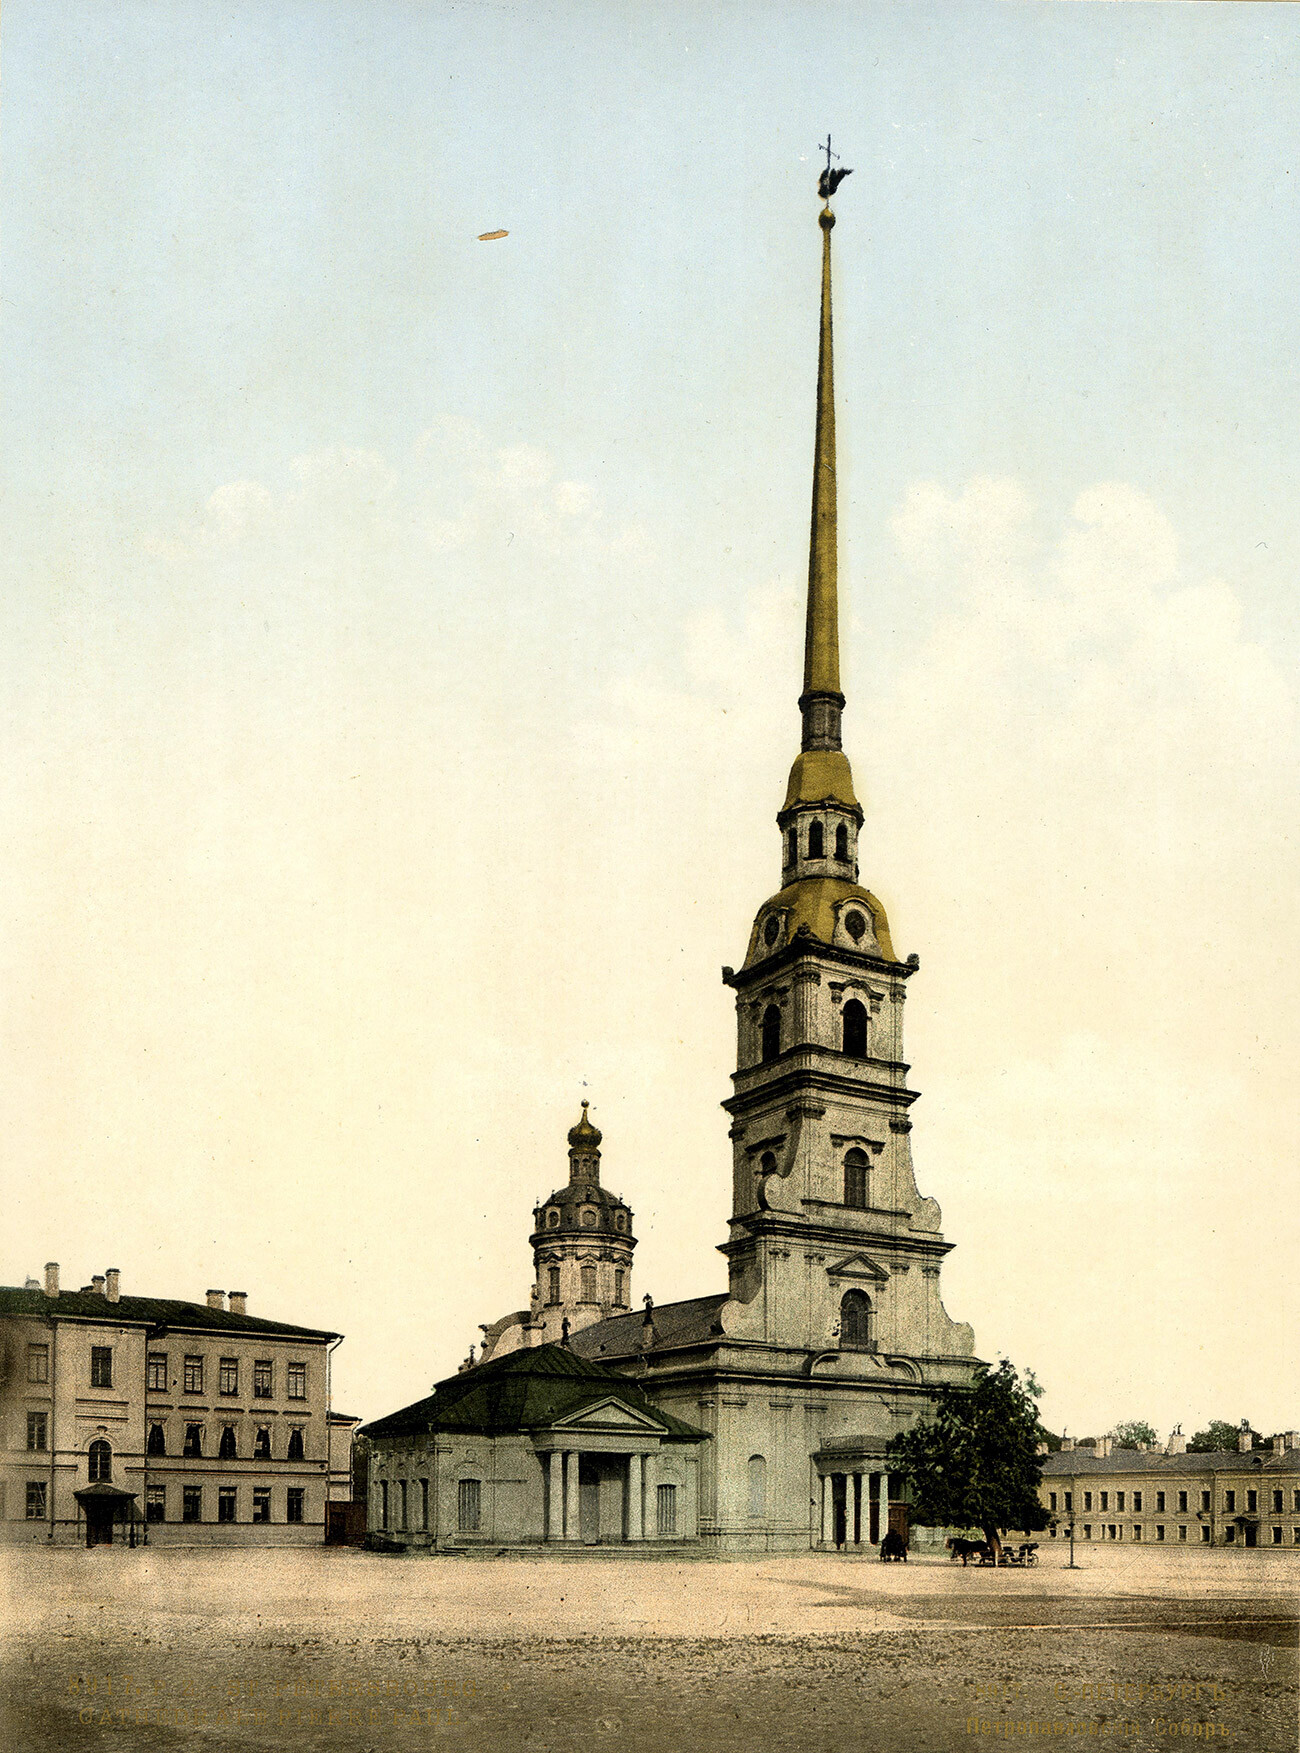 St. Peter and Paul's Cathedral in St Petersburg